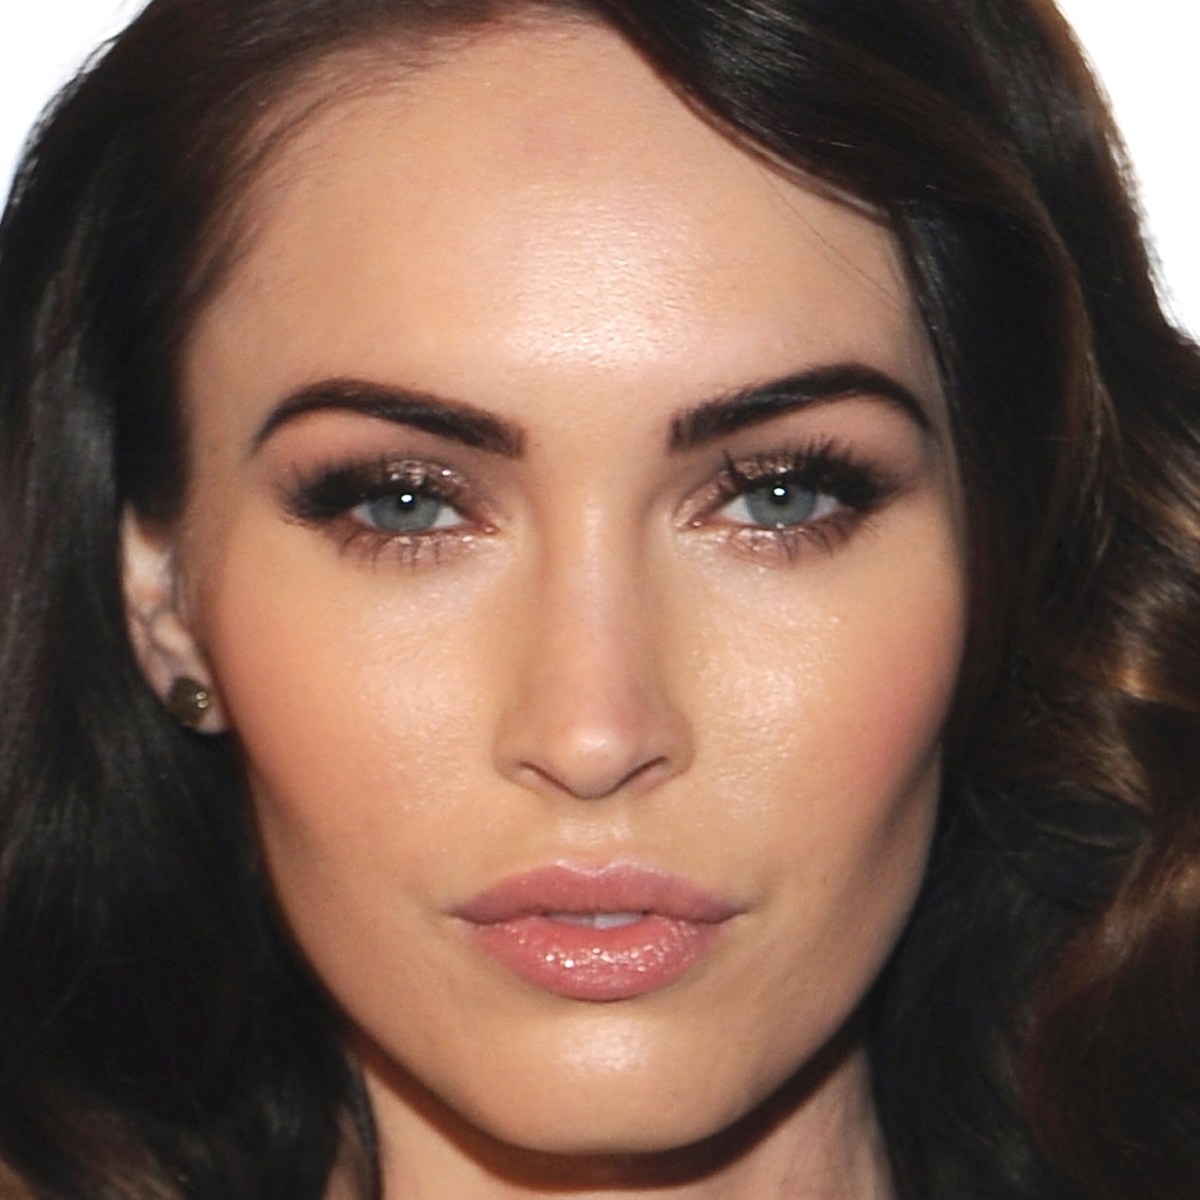 Megan Fox Plastic Surgery Has the Actress Gone Under the Knife